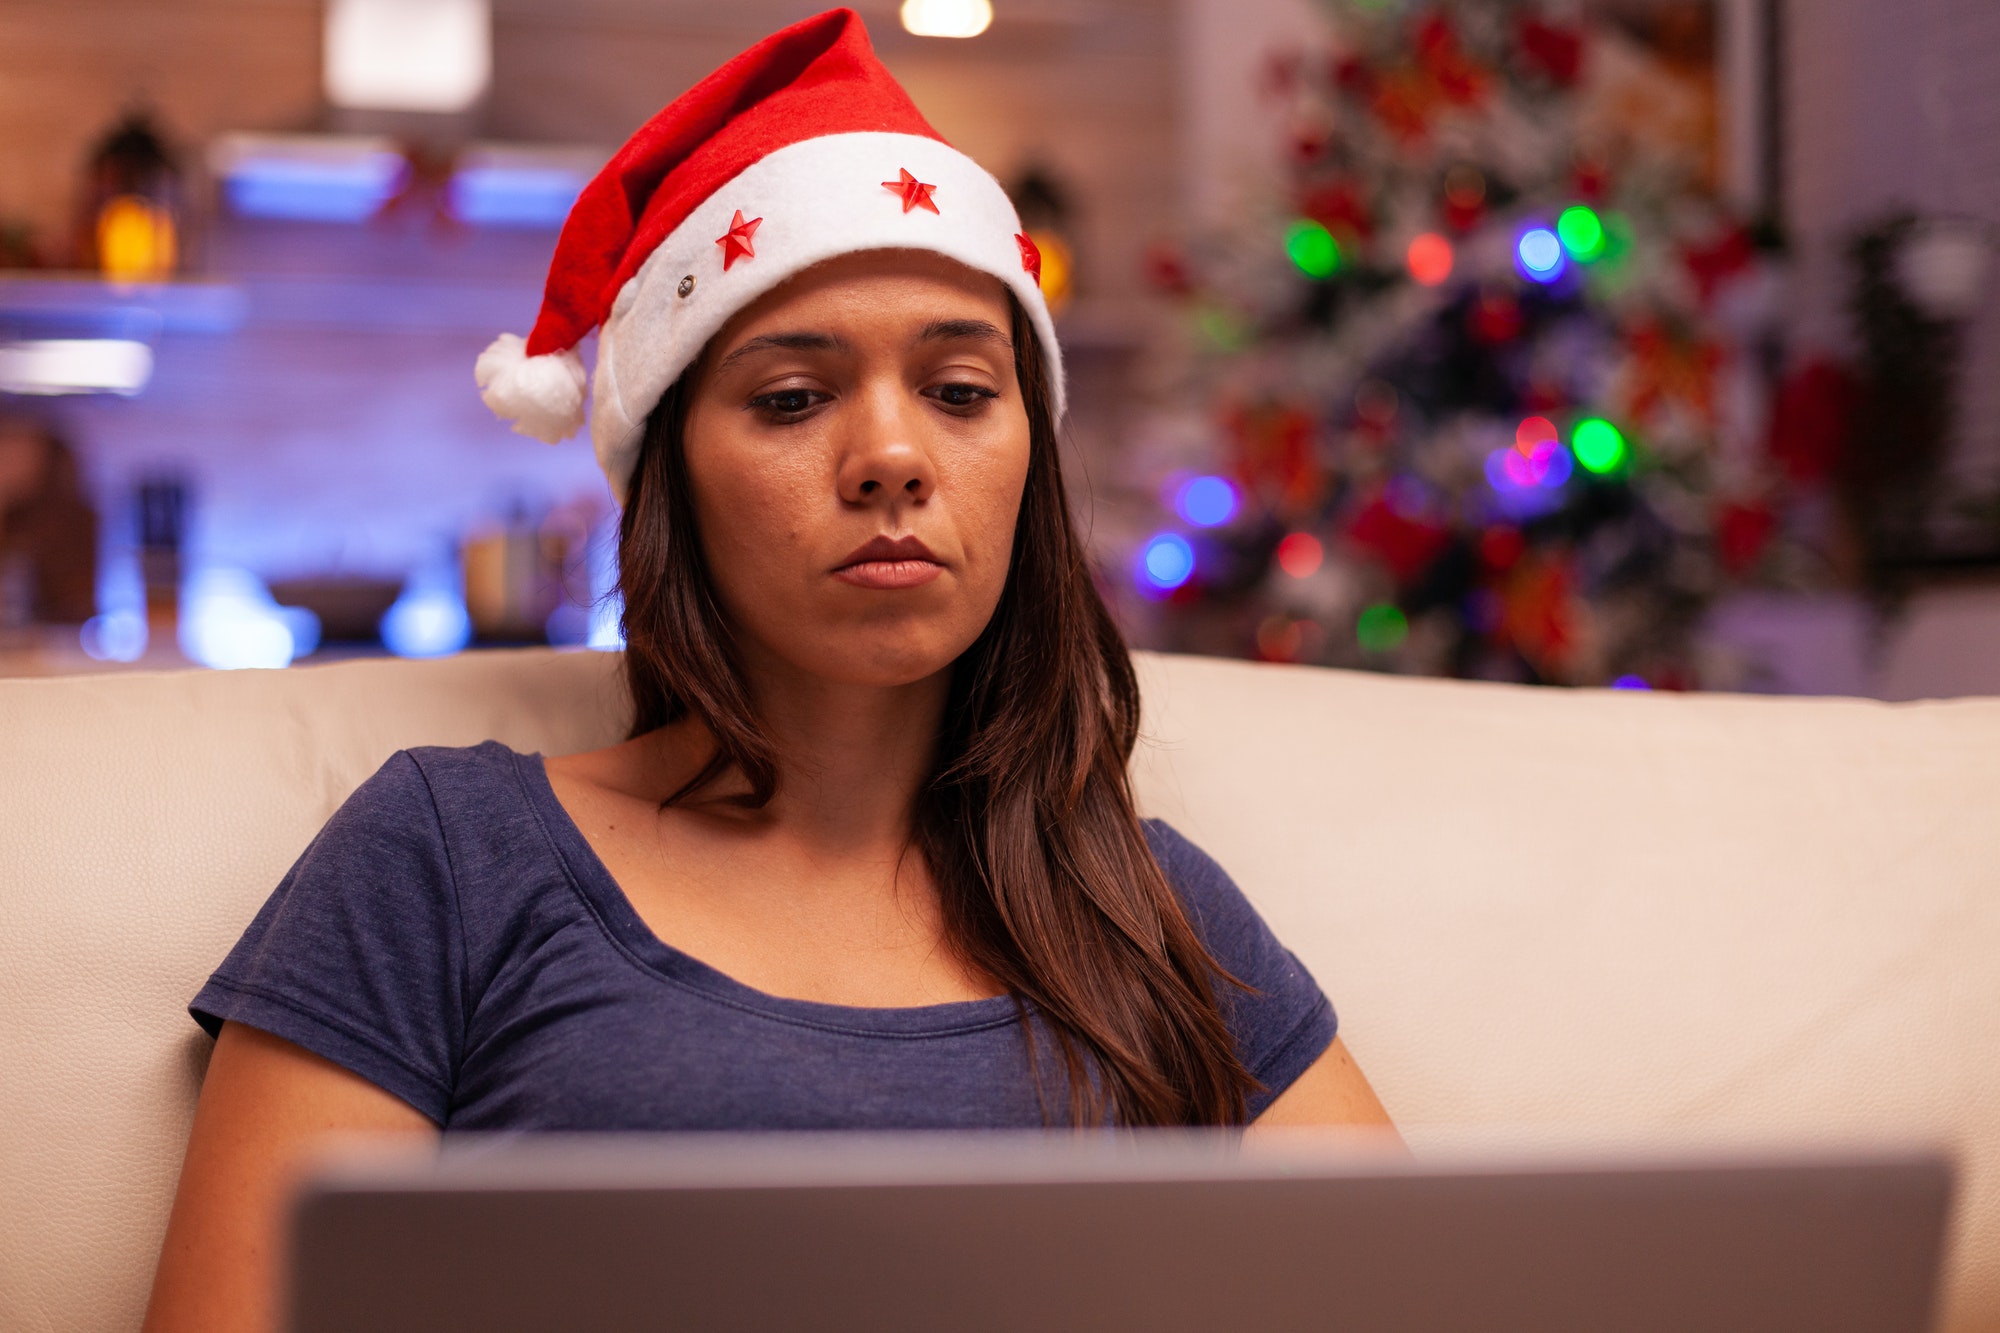 Woman looking at laptop screen reading business email during christmas holiday